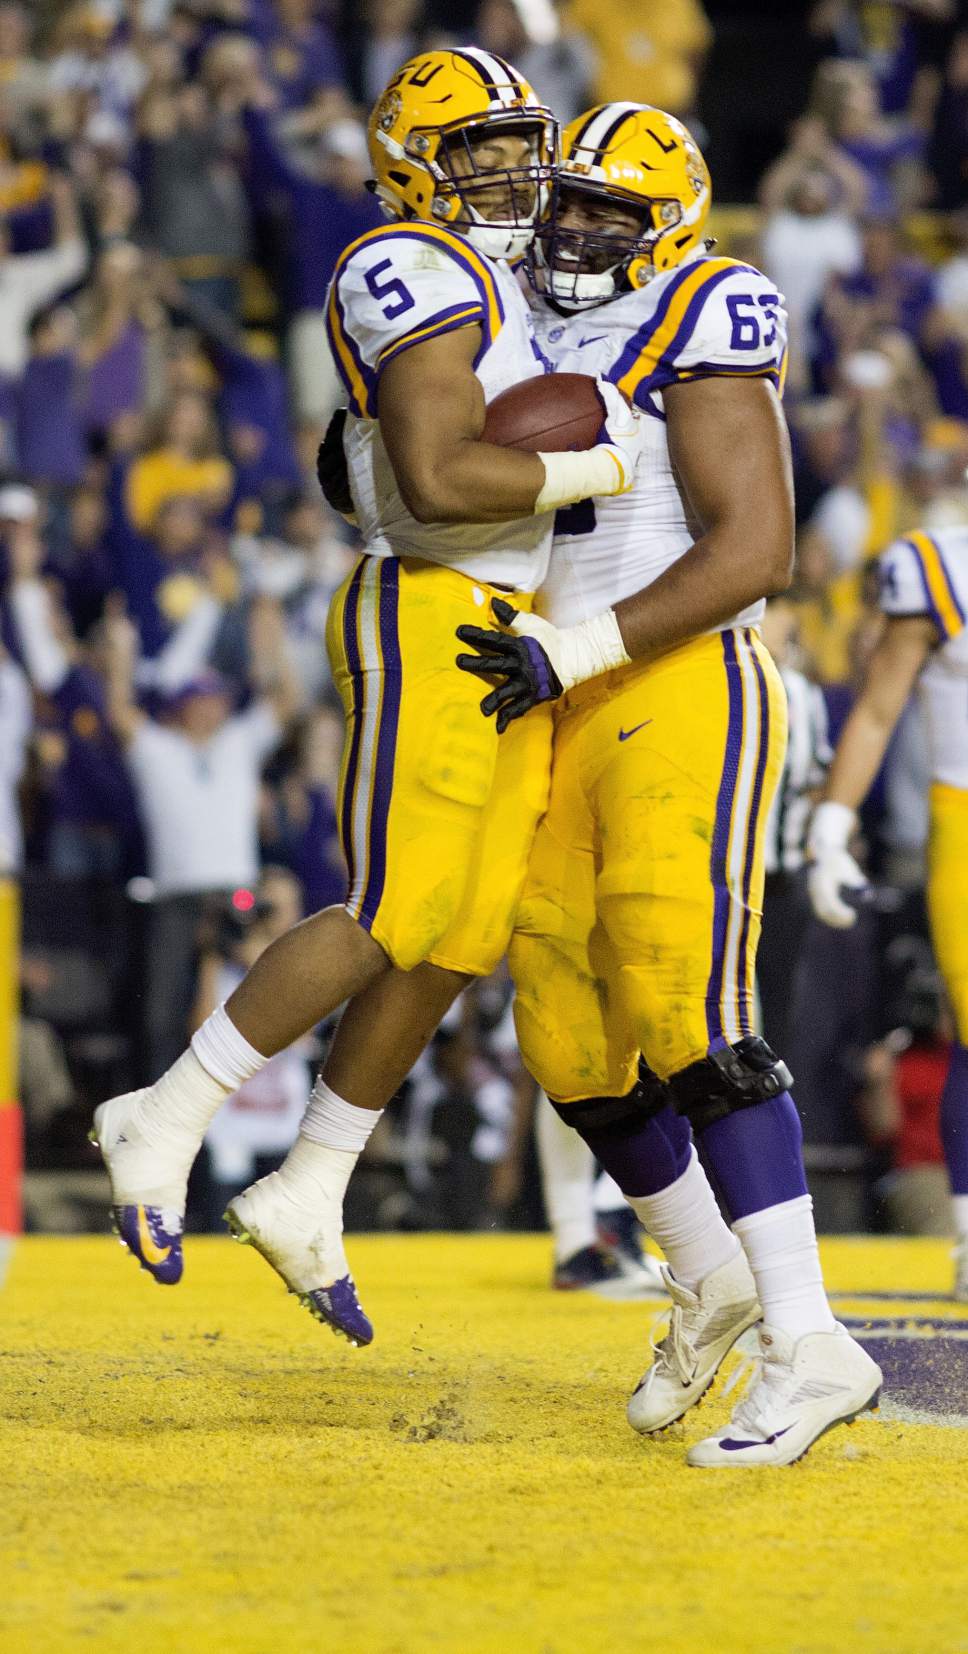 LSU running back Derrius Guice (5) celebrates a touchdown in the end zone with guard K.J. Malone (63) during the second half an NCAA college football game against Mississippi in Baton Rouge, La., Saturday, Oct. 22, 2016. LSU won 38-21. (AP Photo/Max Becherer)